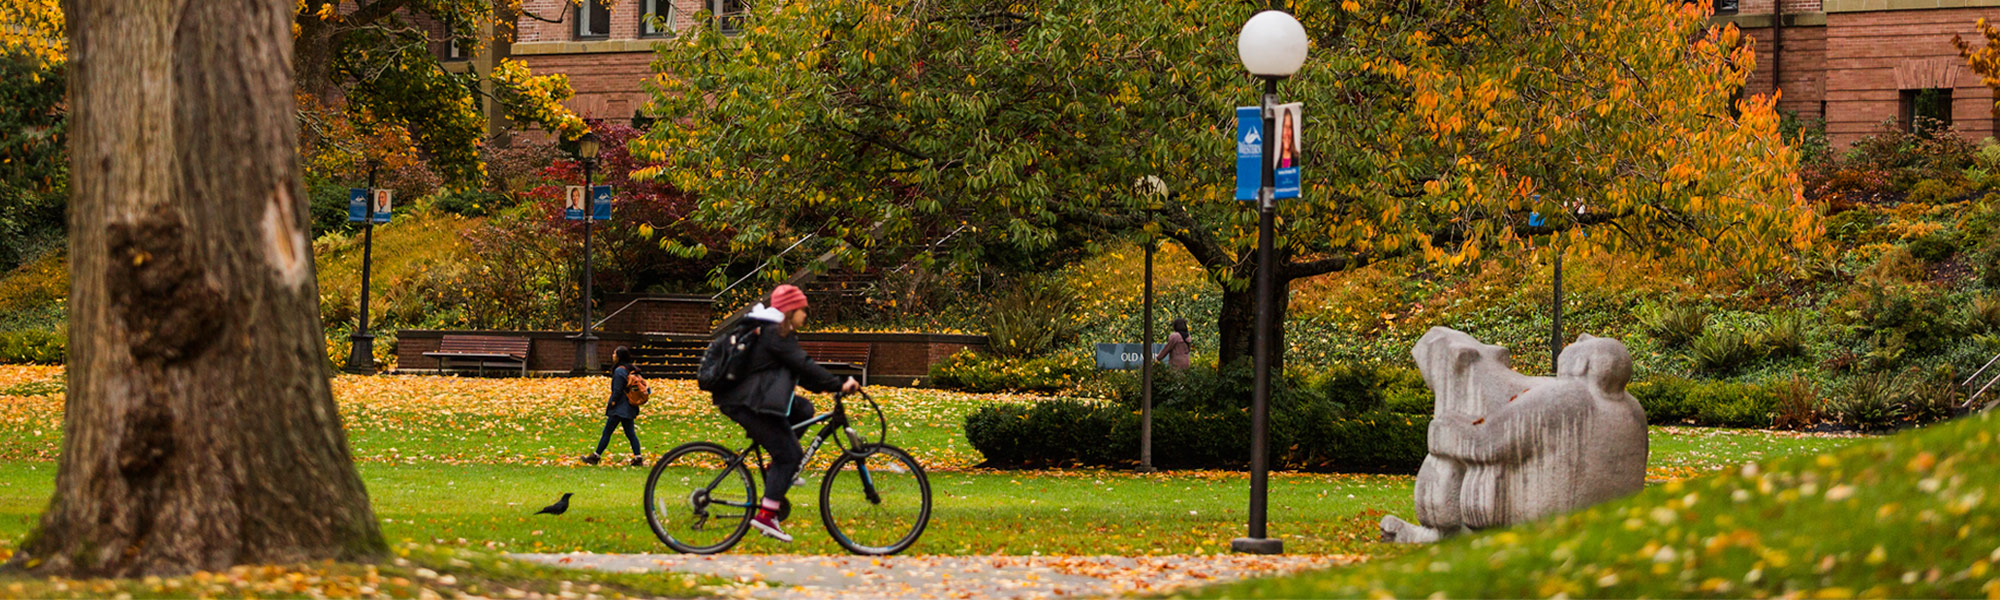 Western in the fall. Students bike and walk on brick pathways.